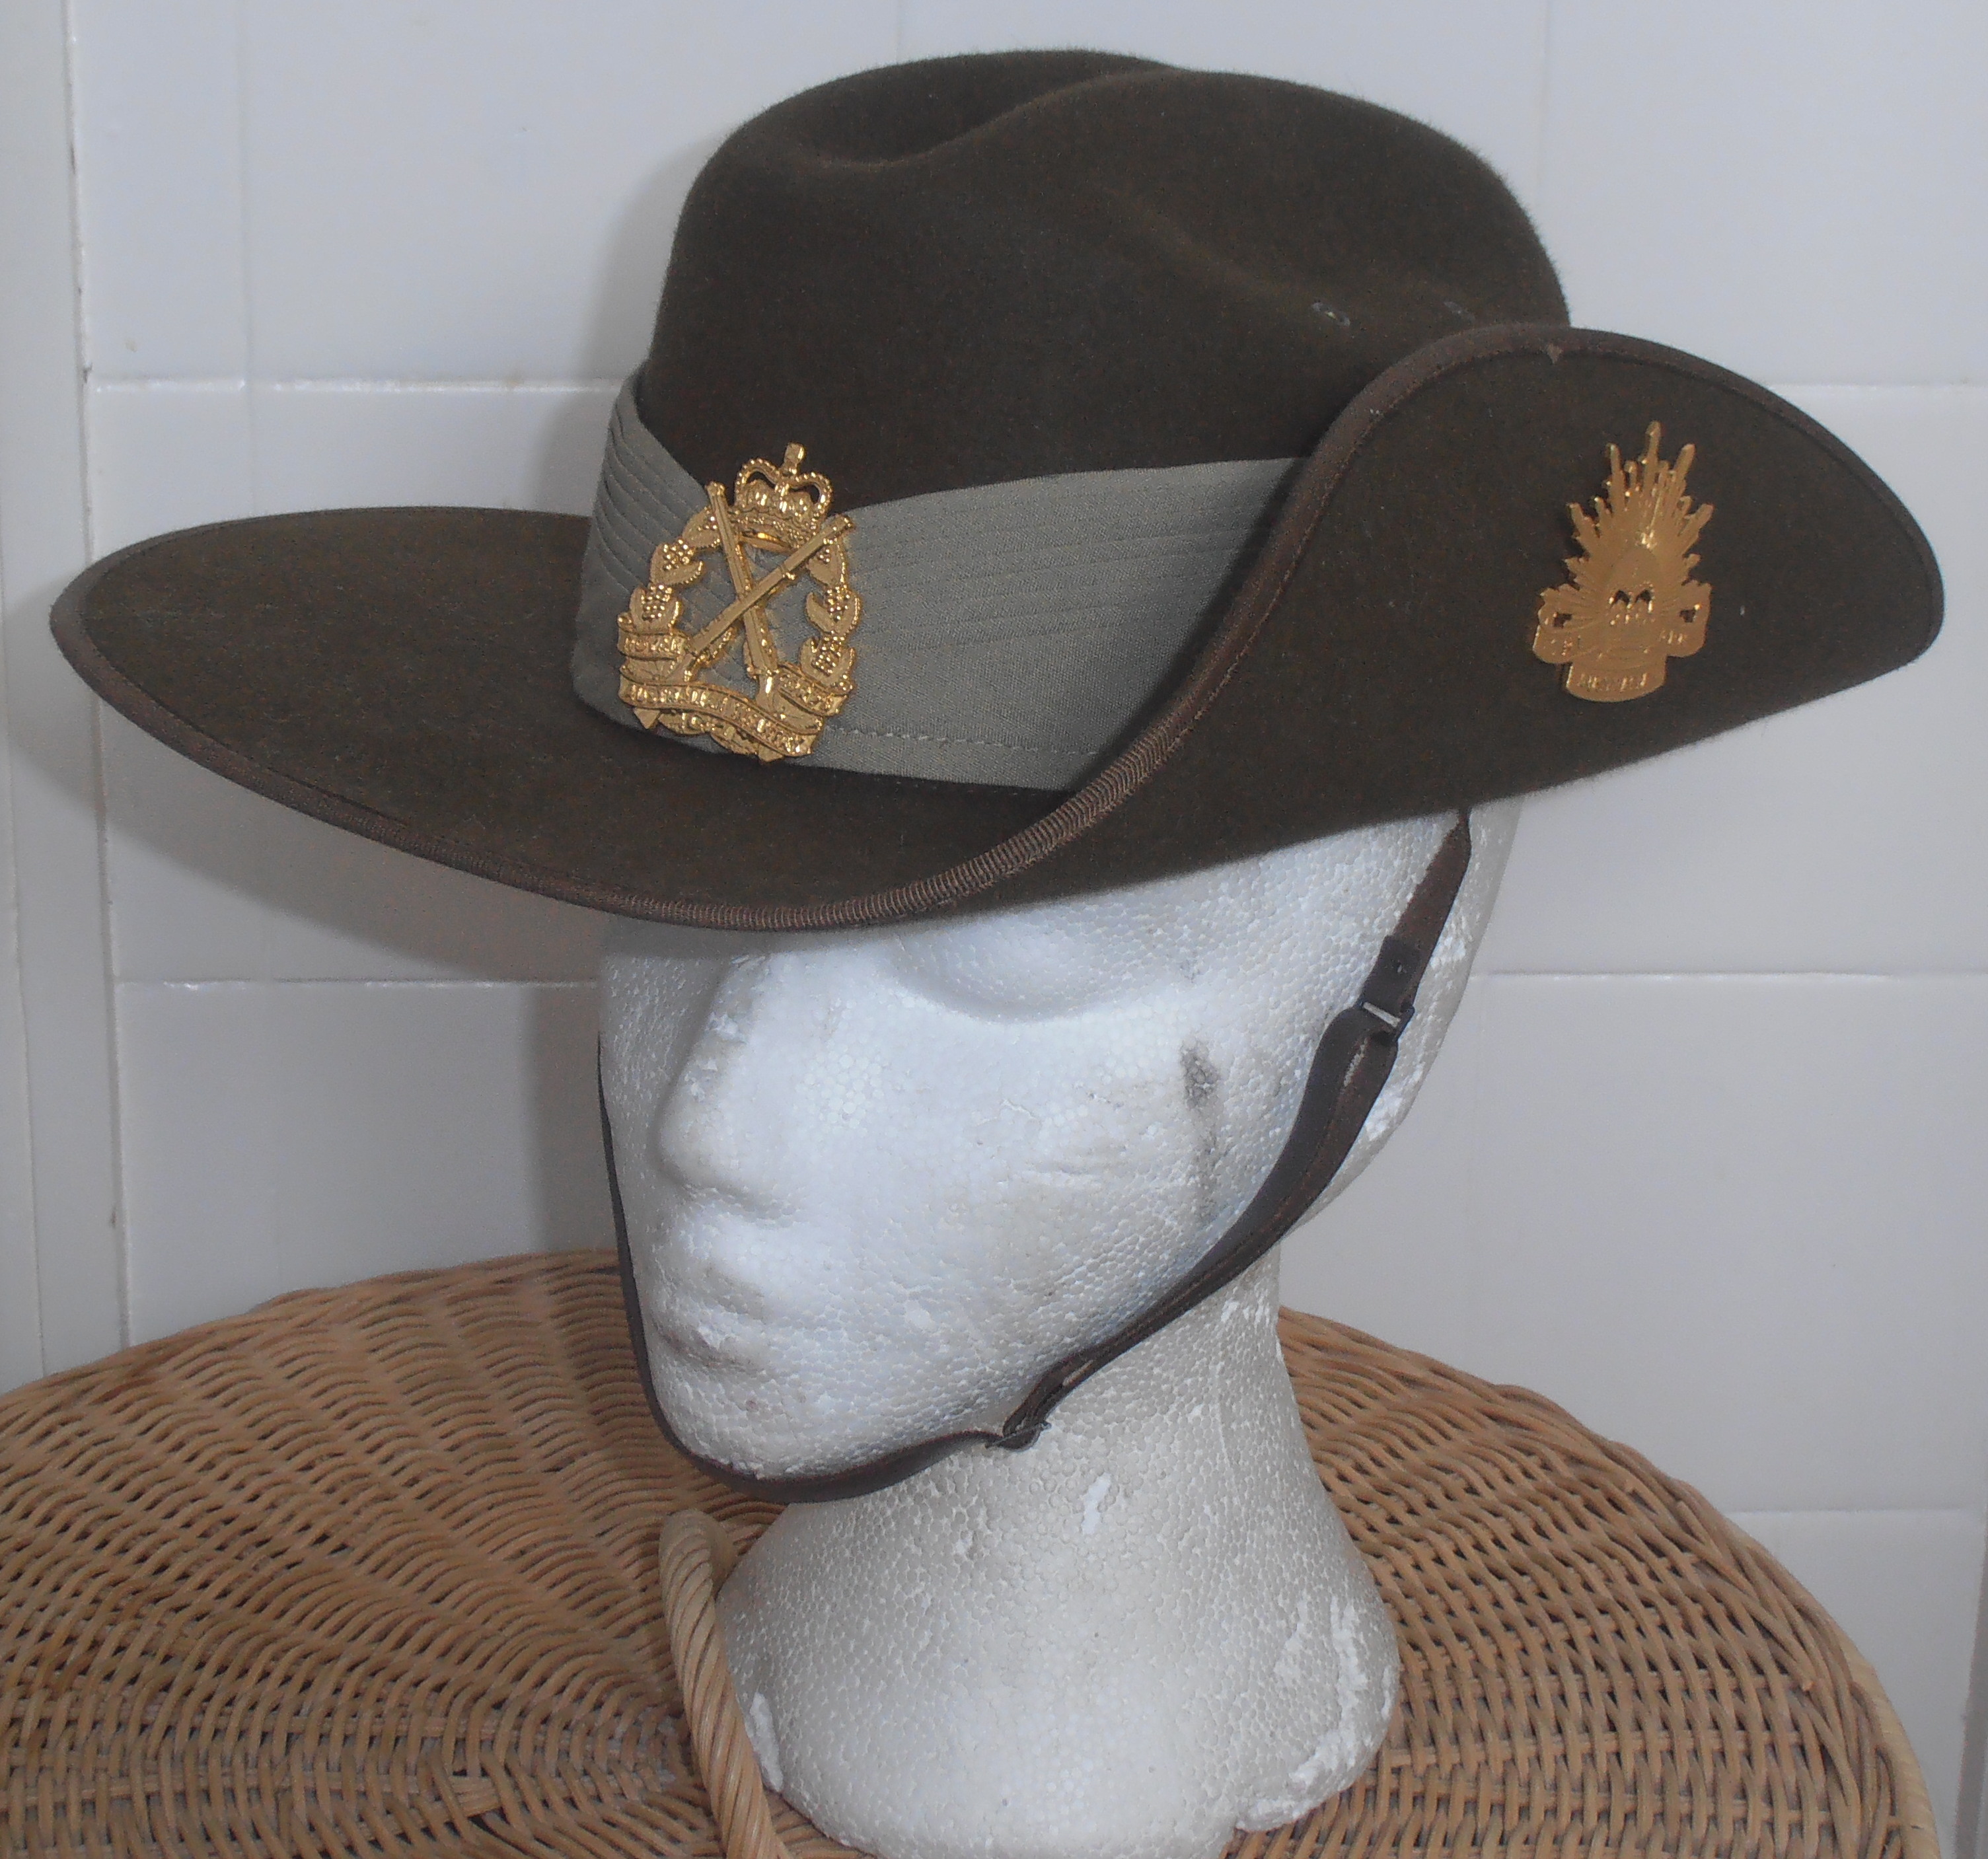 Auscam-inf-slouch-hat.jpg